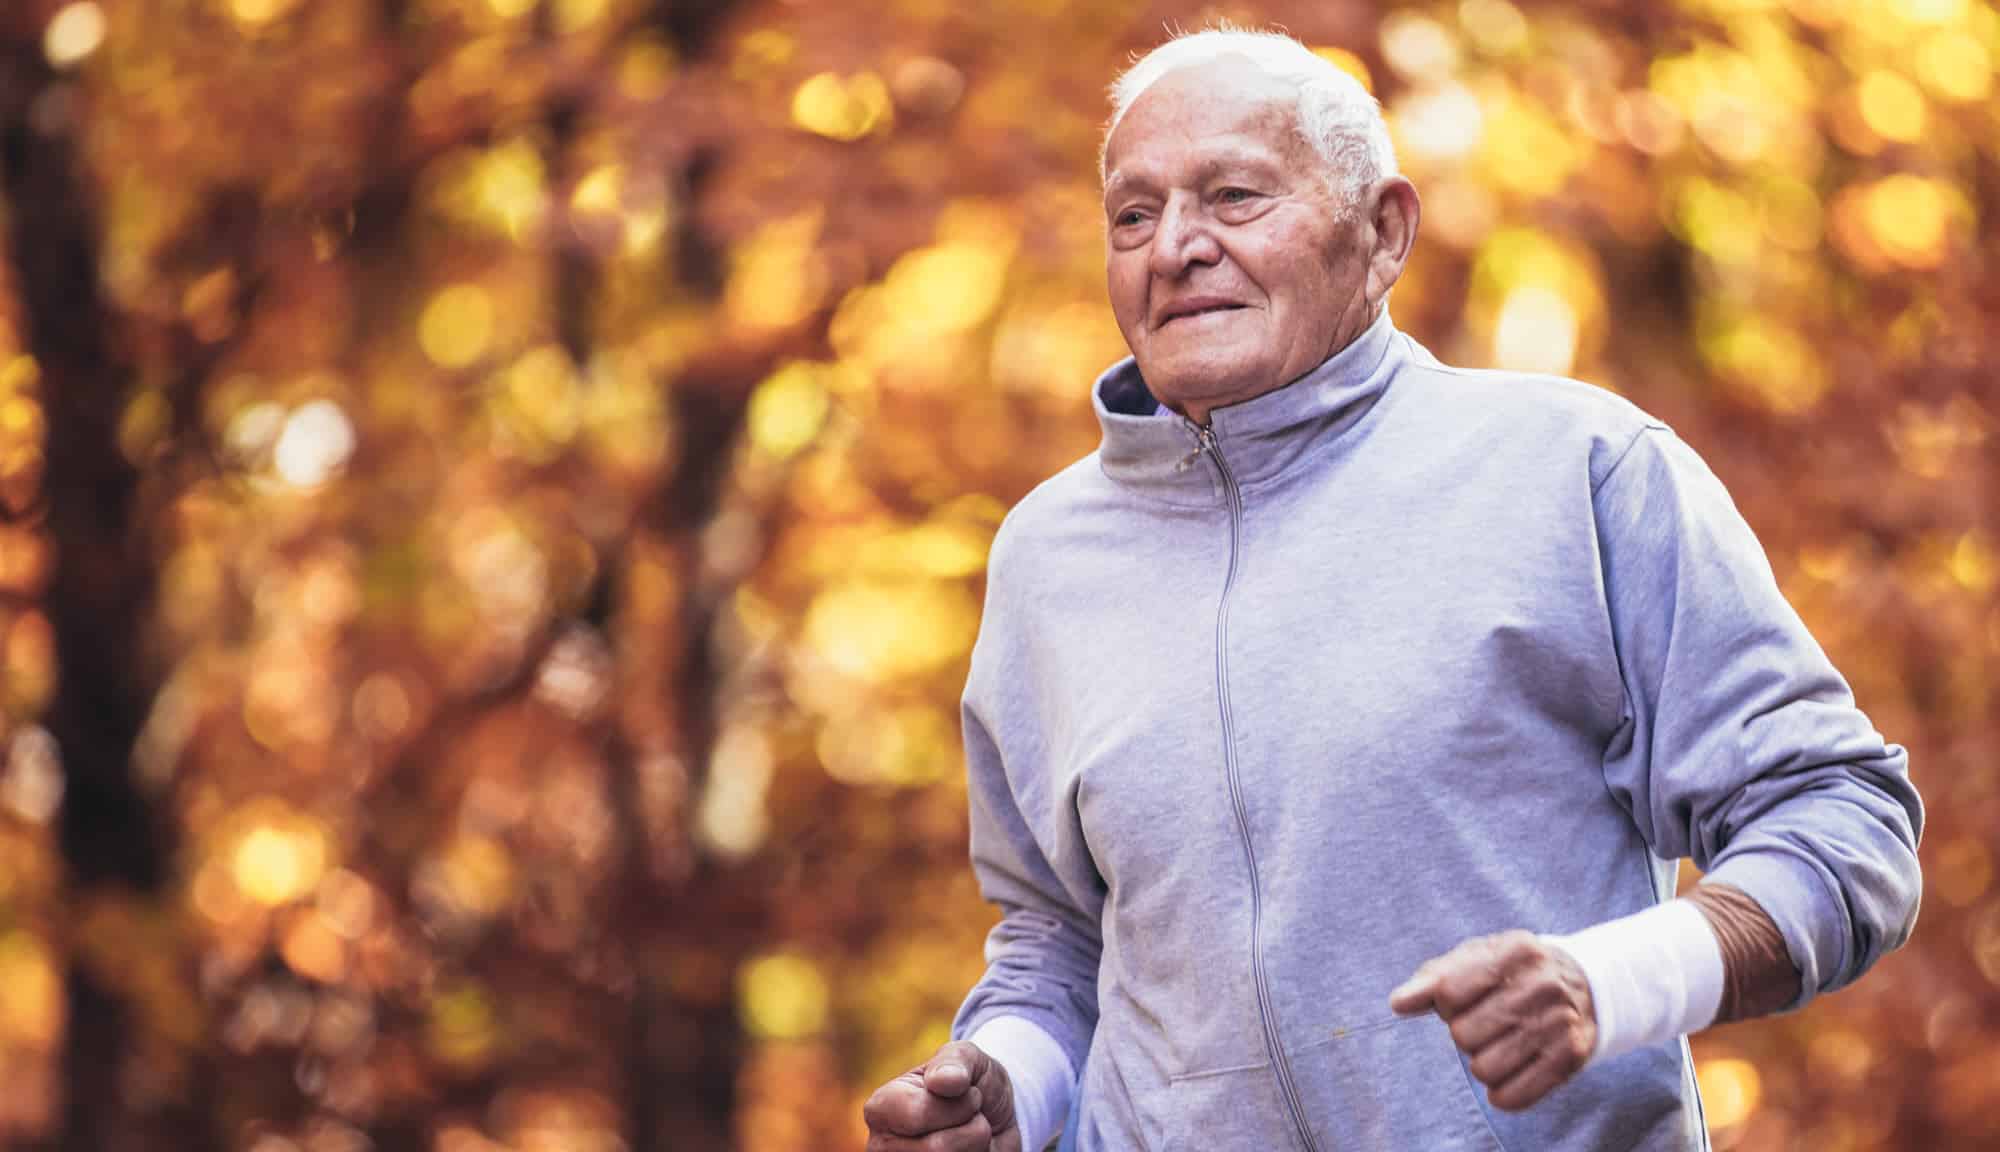 An older man jogging in the autumn.